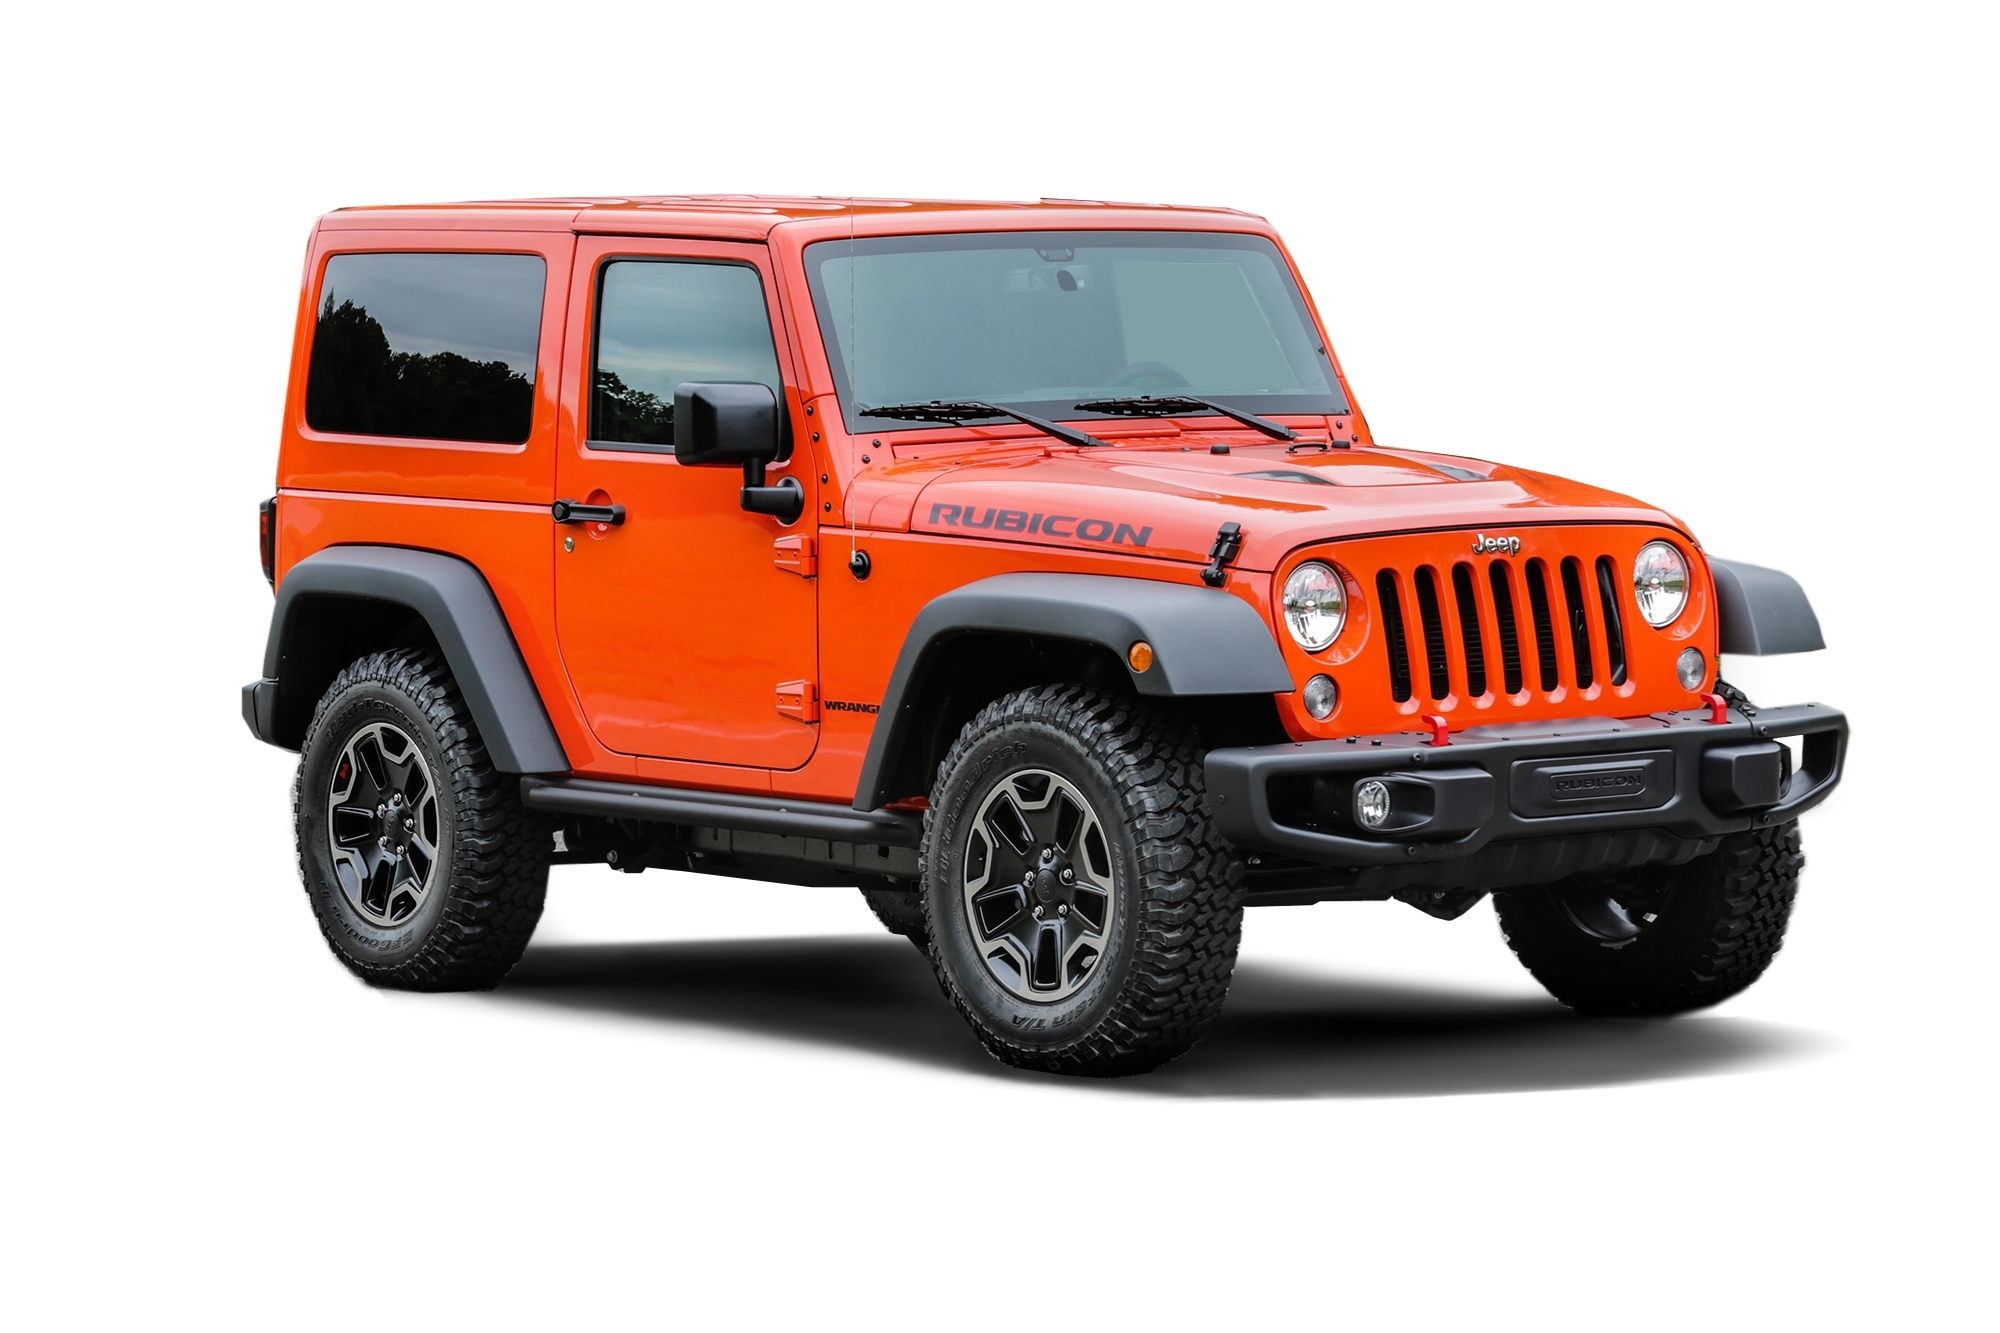 2017 Jeep Wrangler Smoky Mountain Full Specs, Features and Price | CarBuzz